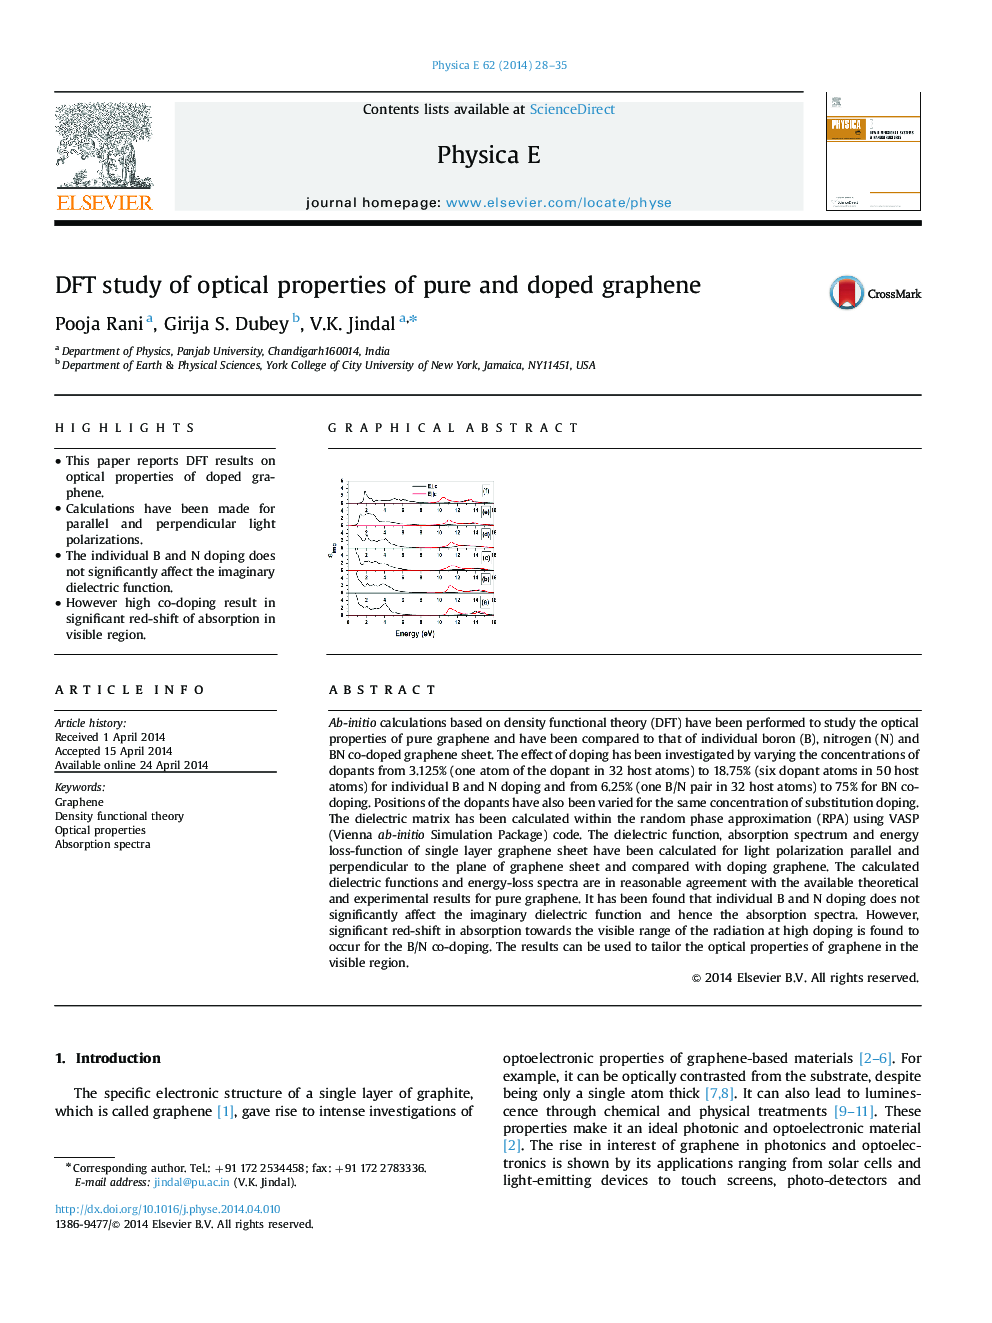 DFT study of optical properties of pure and doped graphene